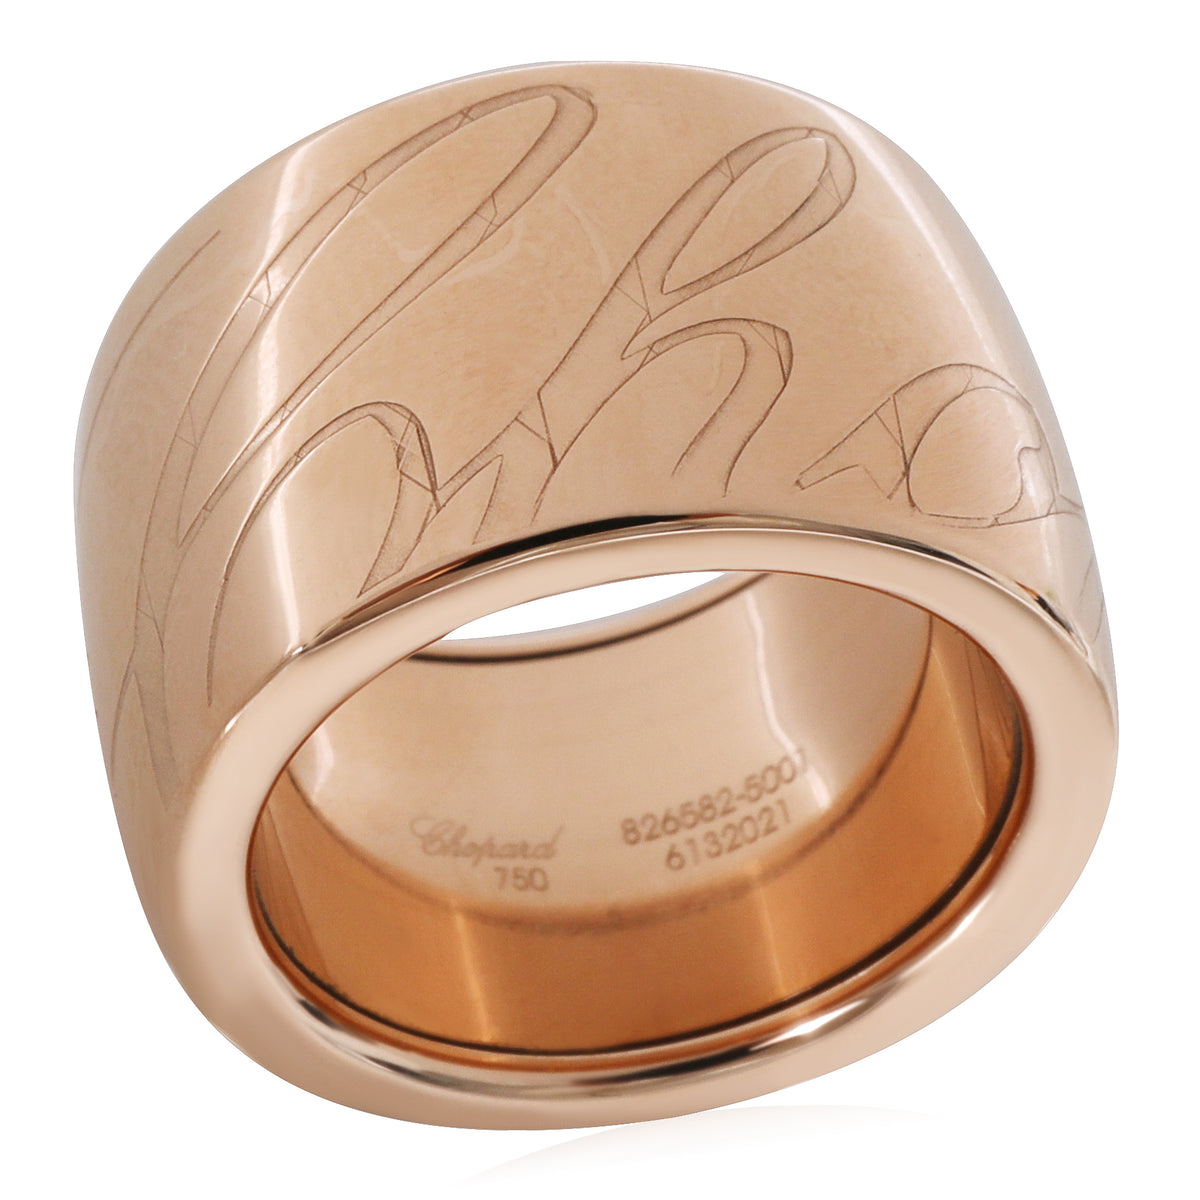 Chopard Chopardissimo Ring in 18K Rose Gold